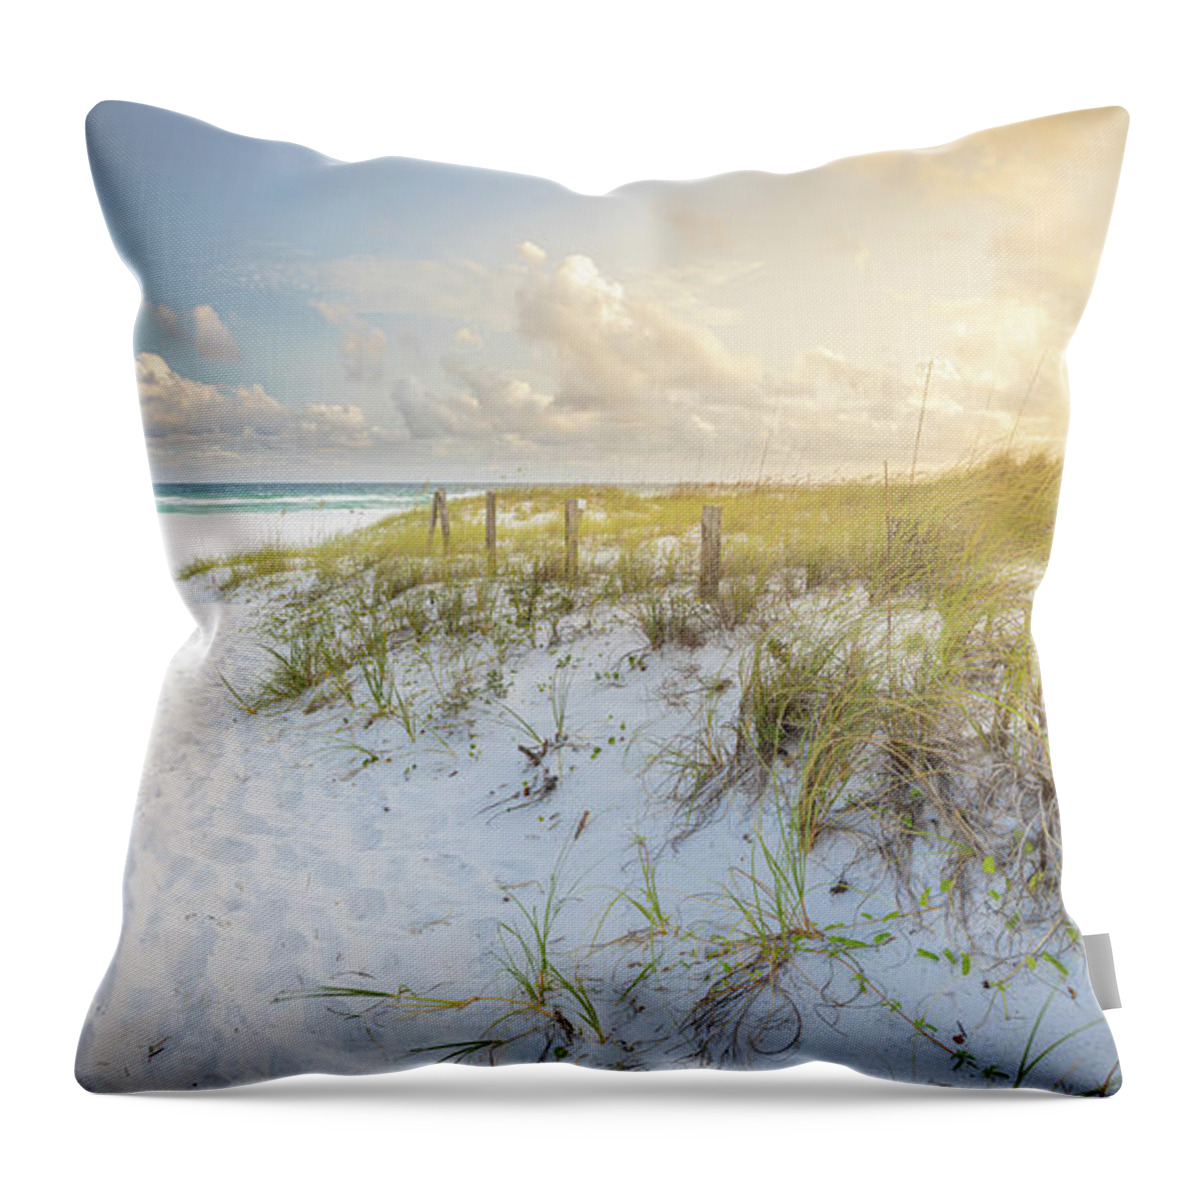 Beach Throw Pillow featuring the photograph The Path To The Seashore At Gulf Islands National Seashore Florida by Jordan Hill